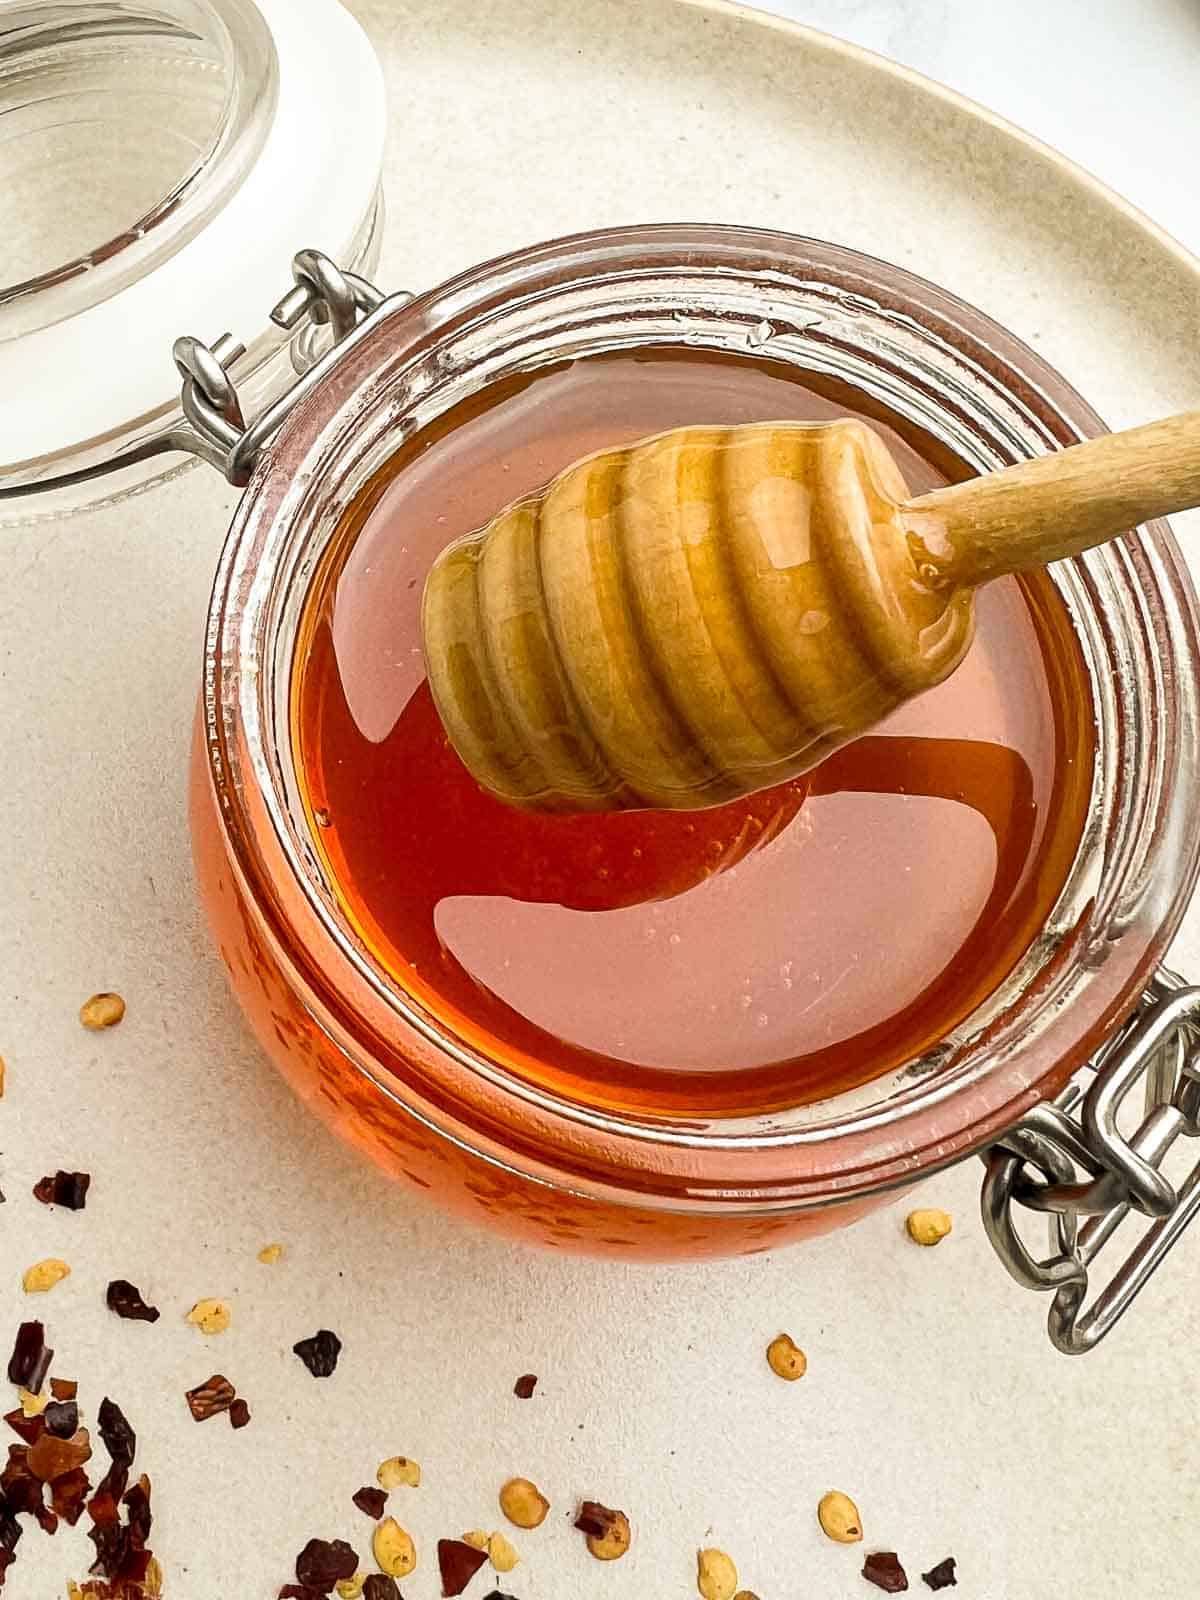 Overhead view of a jar of hot honey with a honey dipper.